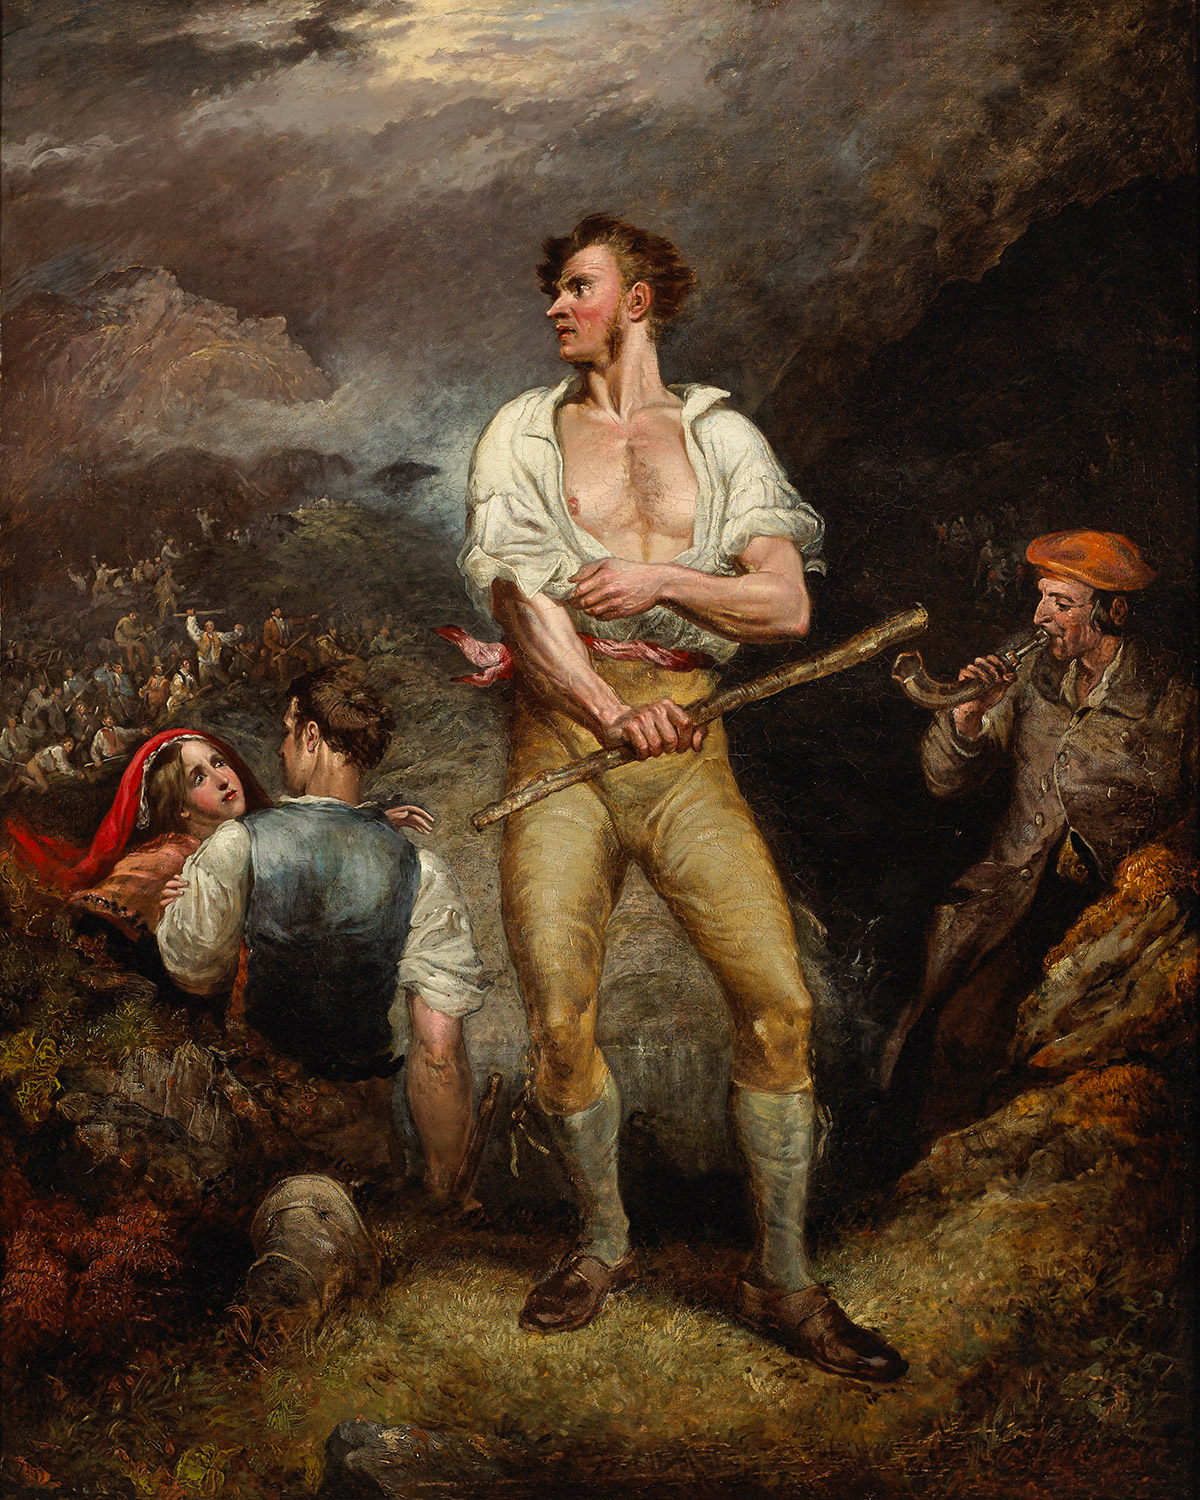 A painting entitled "The Fighter" by Daniel Macdonald